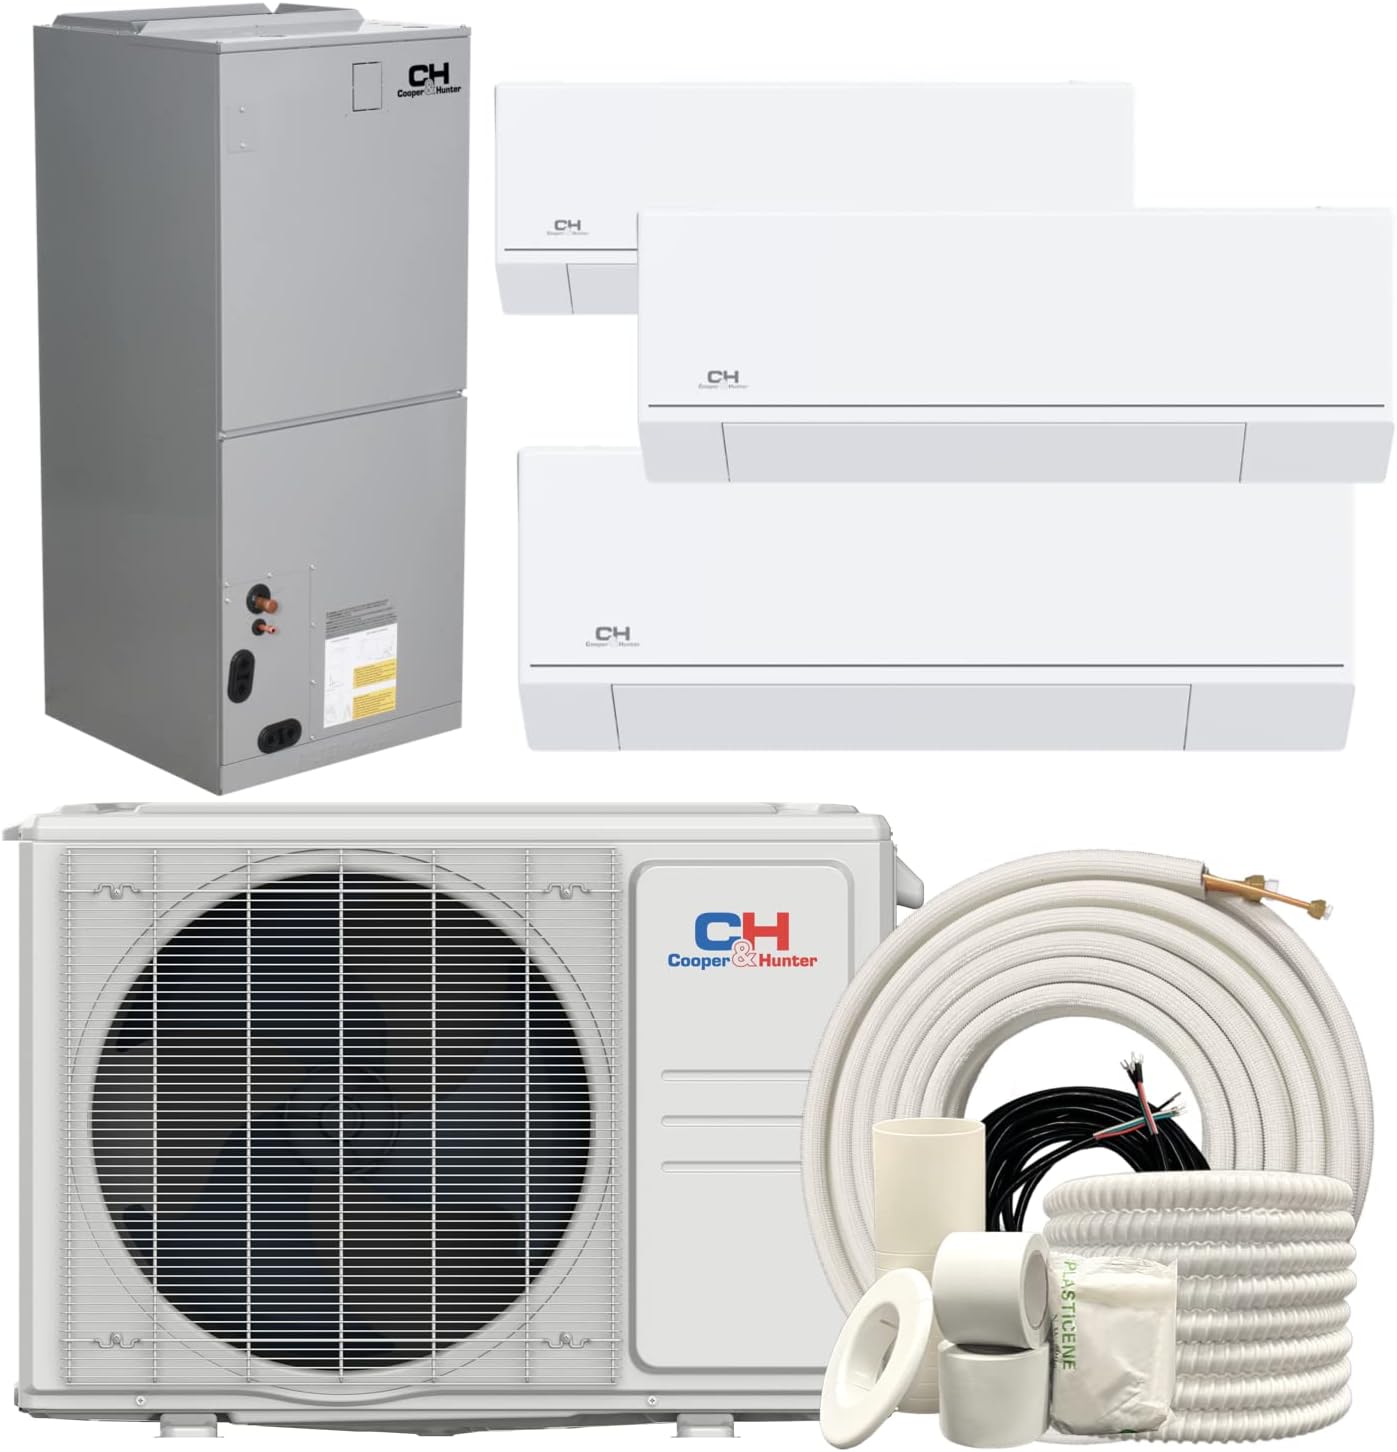 Cooper & Hunter Astoria Series 48,000 BTU Four (4) Zone with 6000, 6000, 12000 BTU Wall Mount and 24000 BTU Multi Position Air Handler Ductless Mini Split A/C and Heater with Installation Kits